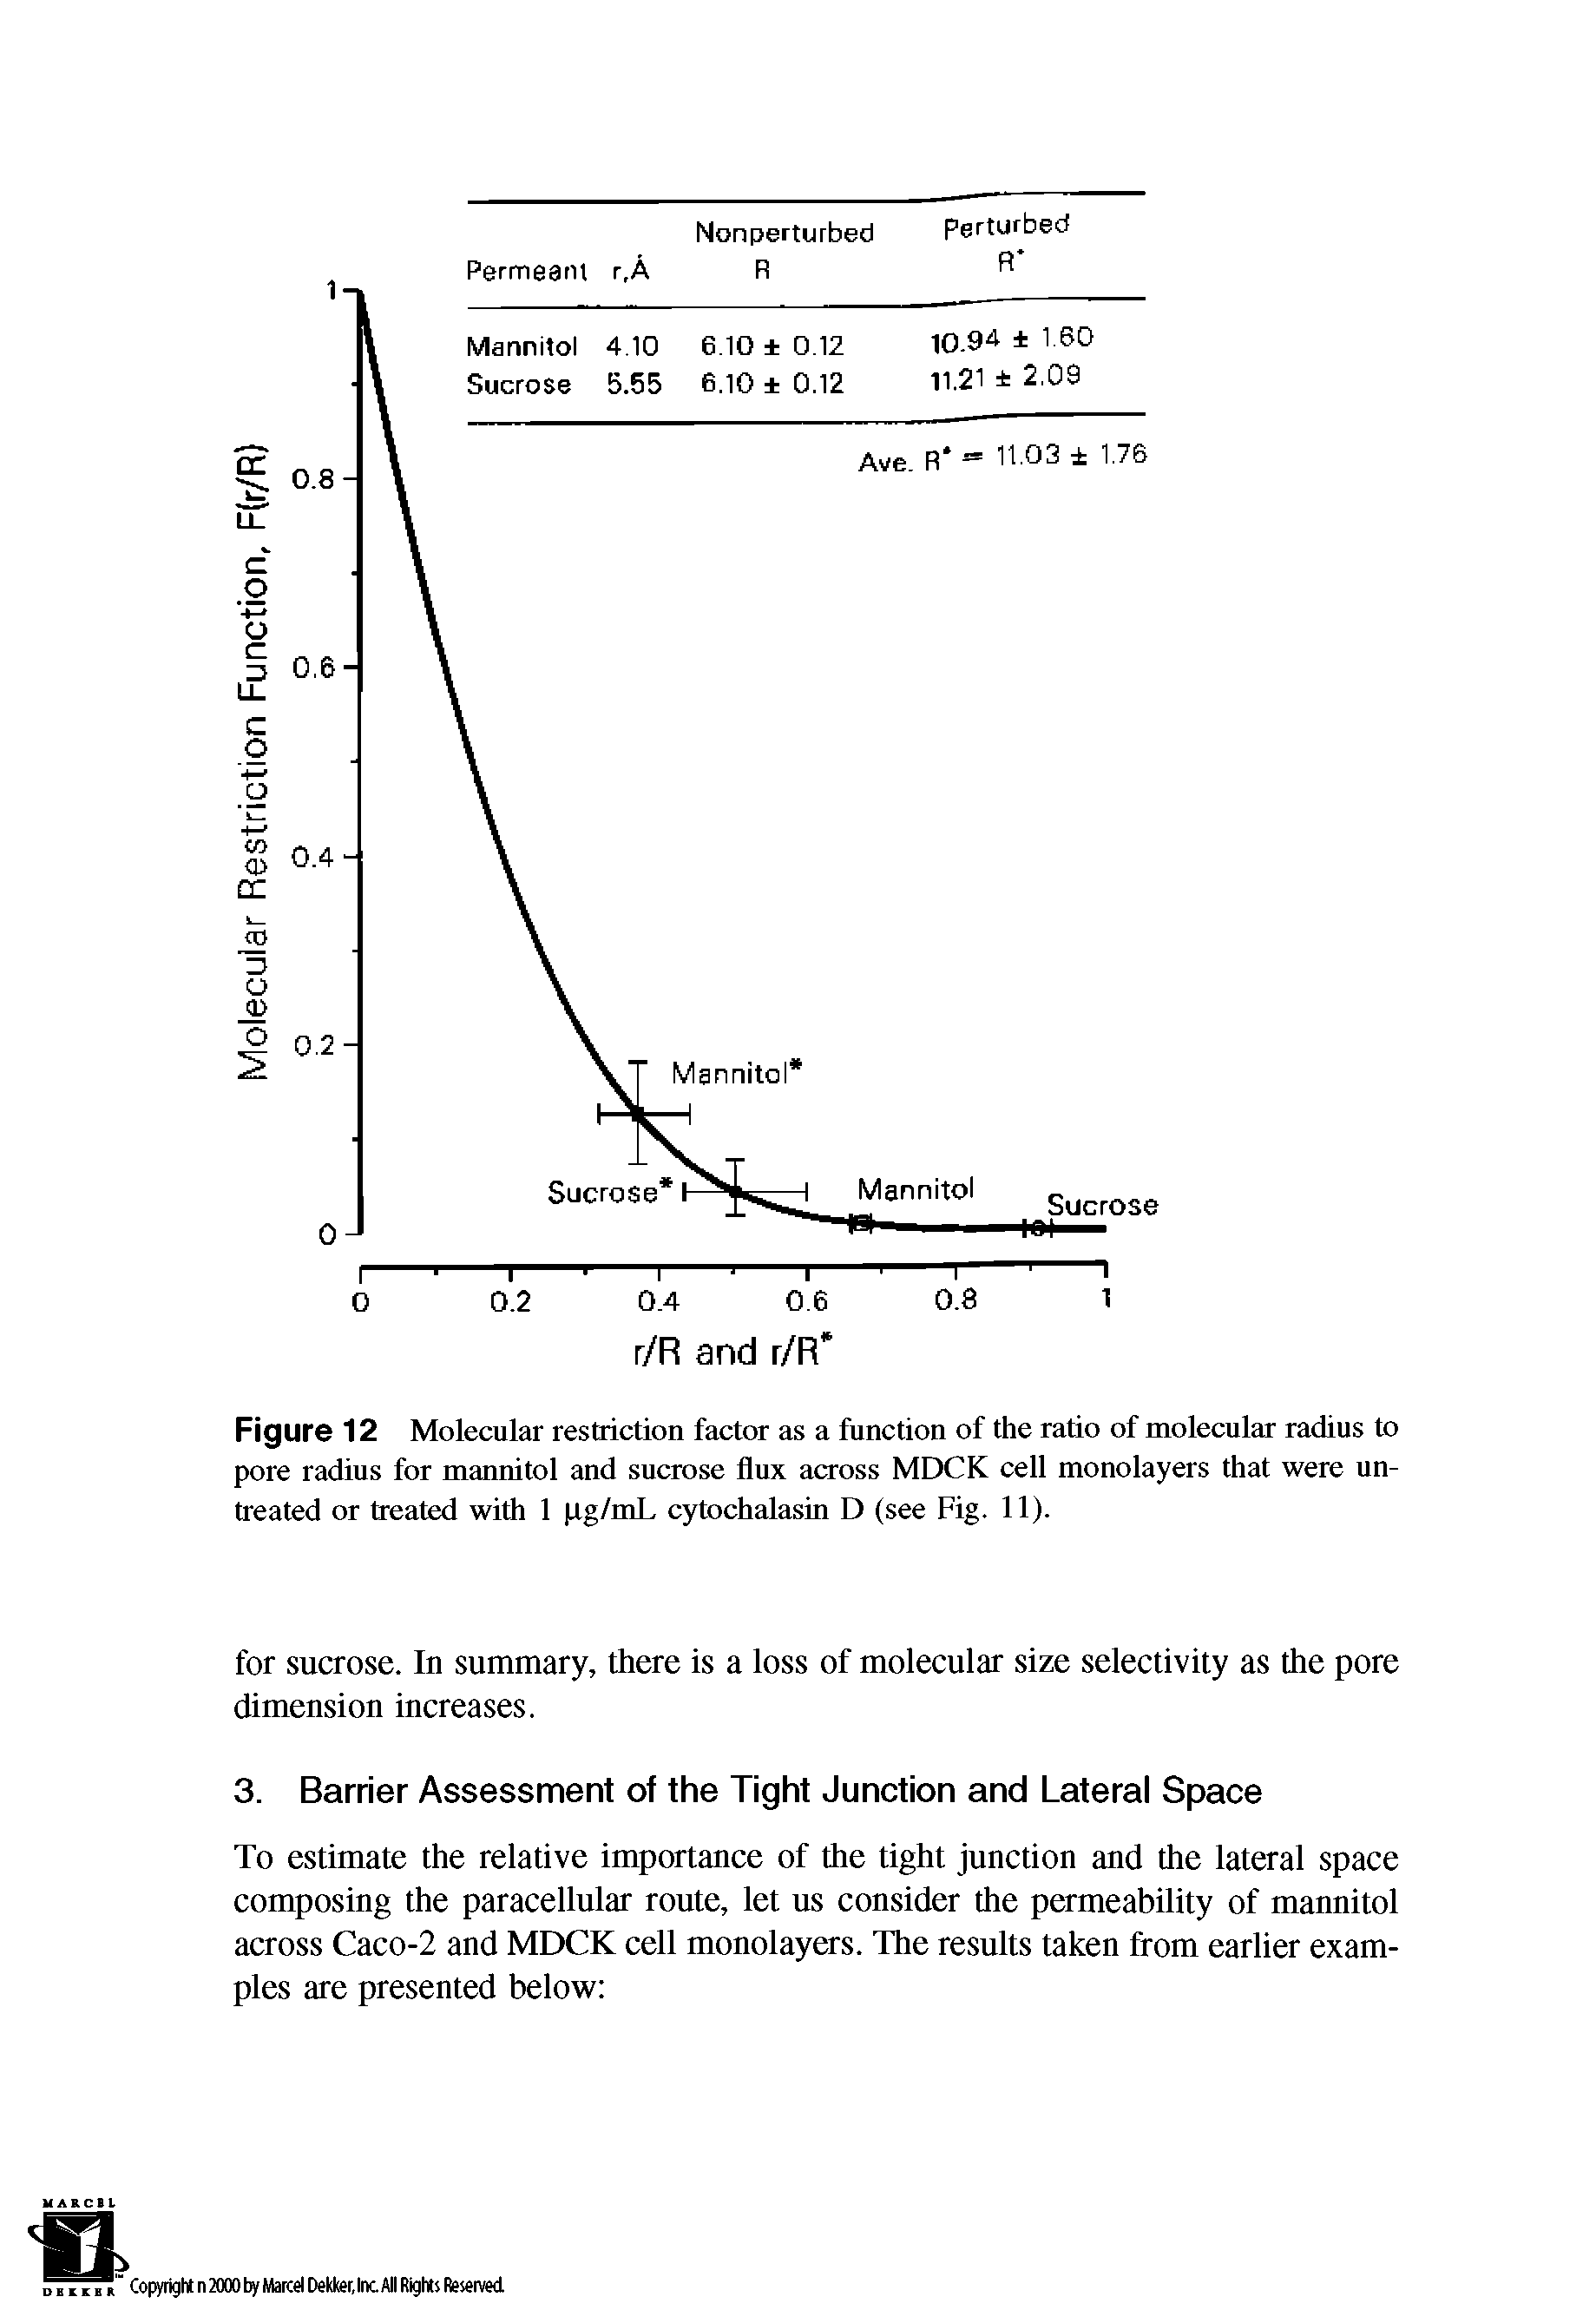 Figure 12 Molecular restriction factor as a function of the ratio of molecular radius to pore radius for mannitol and sucrose flux across MDCK cell monolayers that were untreated or treated with 1 pg/mL cytochalasin D (see Fig. 11).